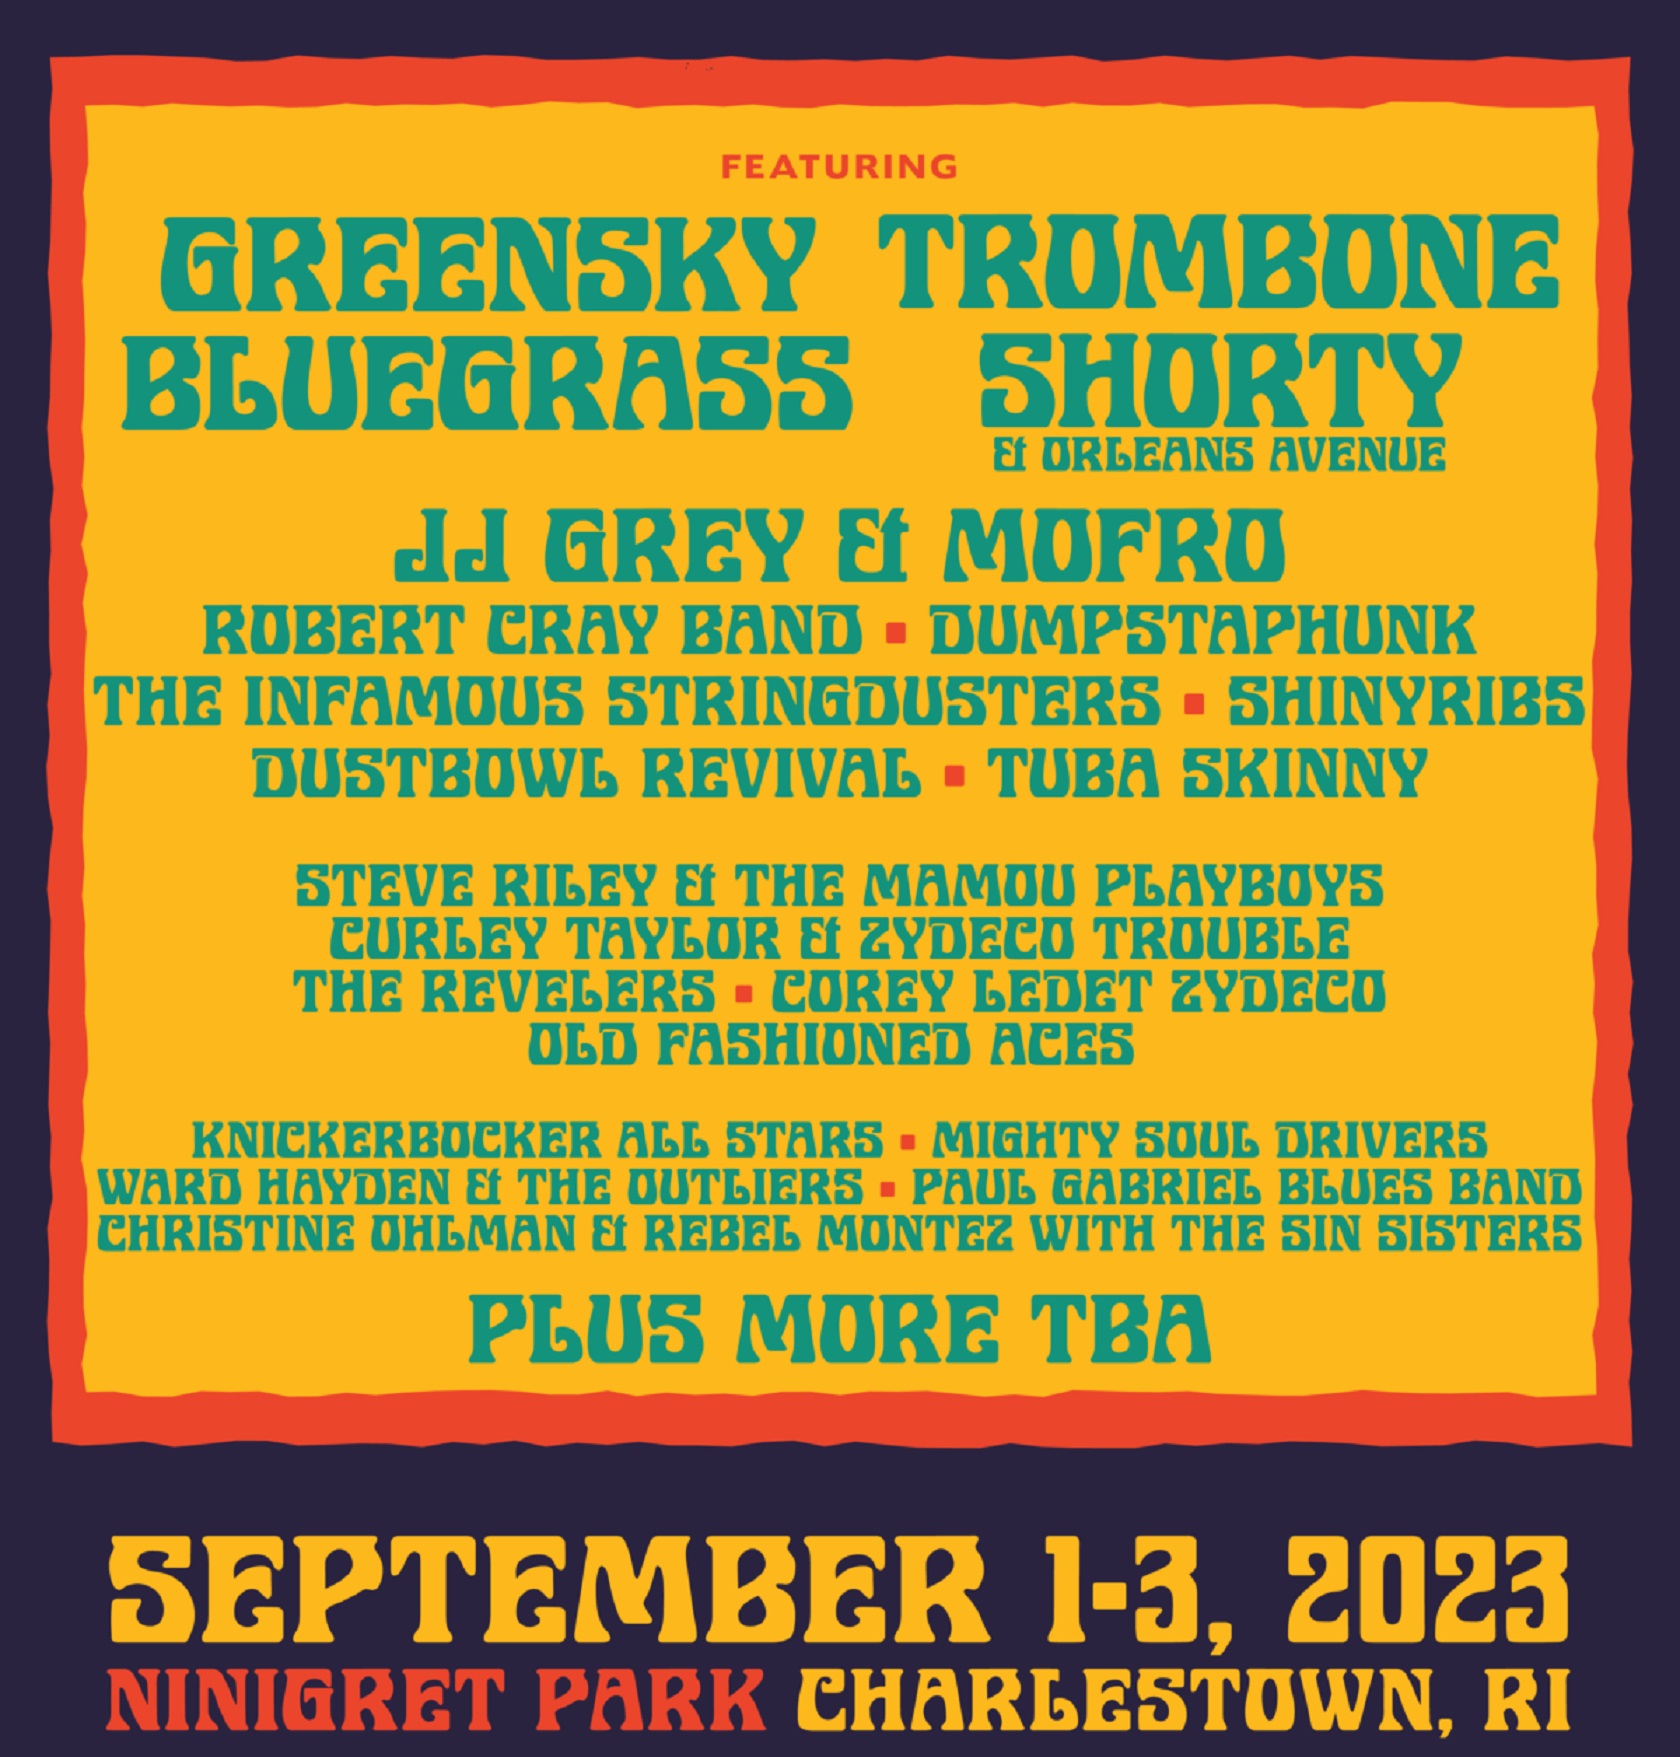 Greensky Bluegrass, Trombone Shorty and Dumpstaphunk to Headline the 25th Rhythm & Roots Festival